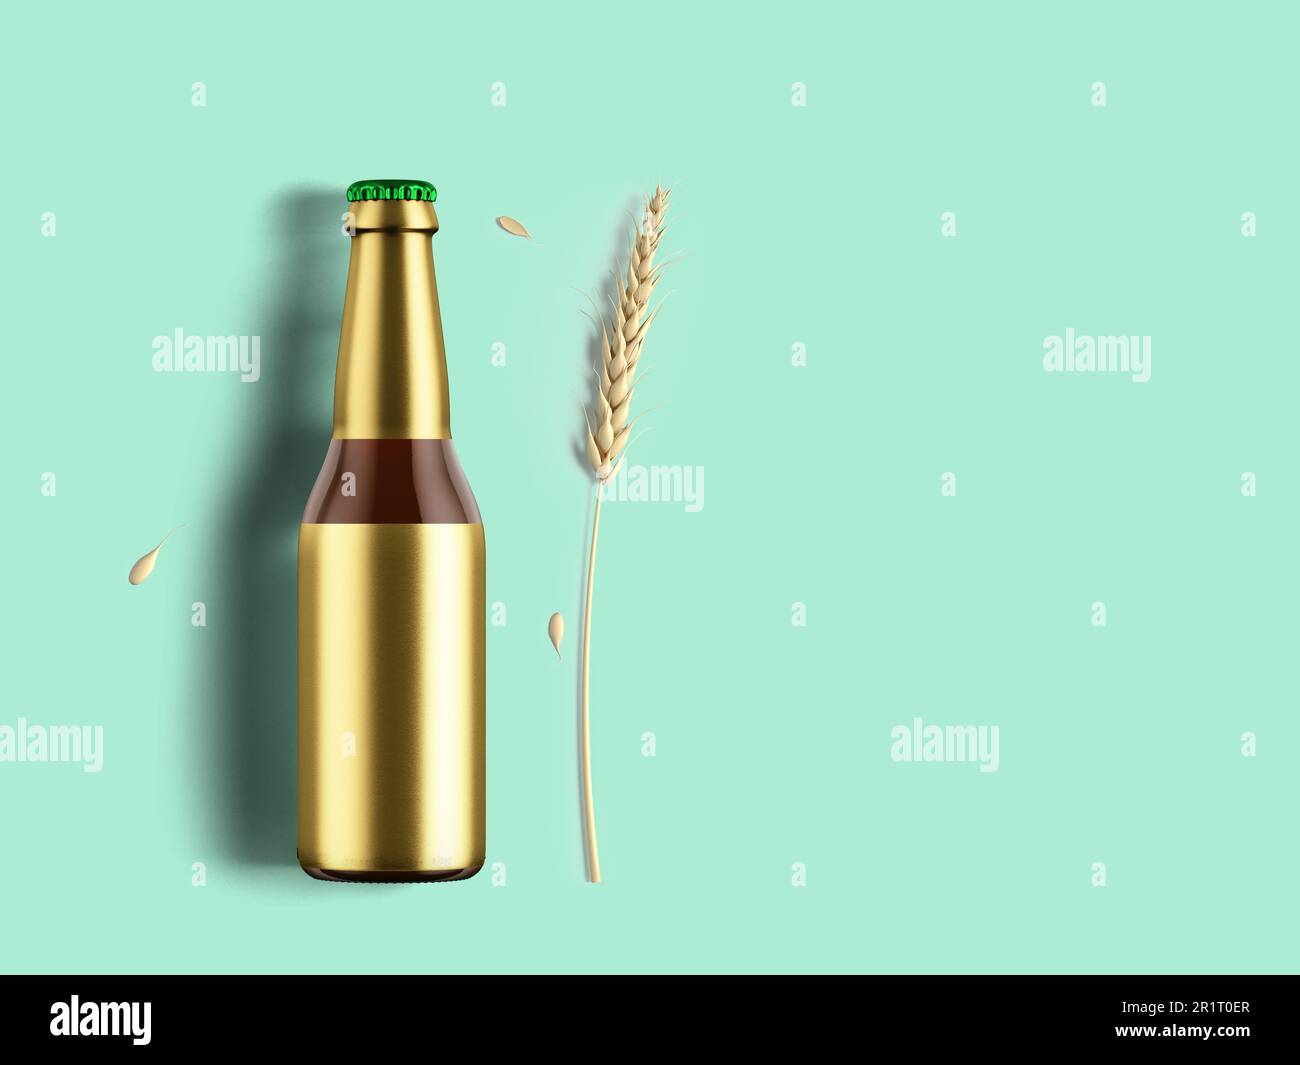 Round bottle with blank gold foil label isolated . beer fiesta concept. Stock Photo